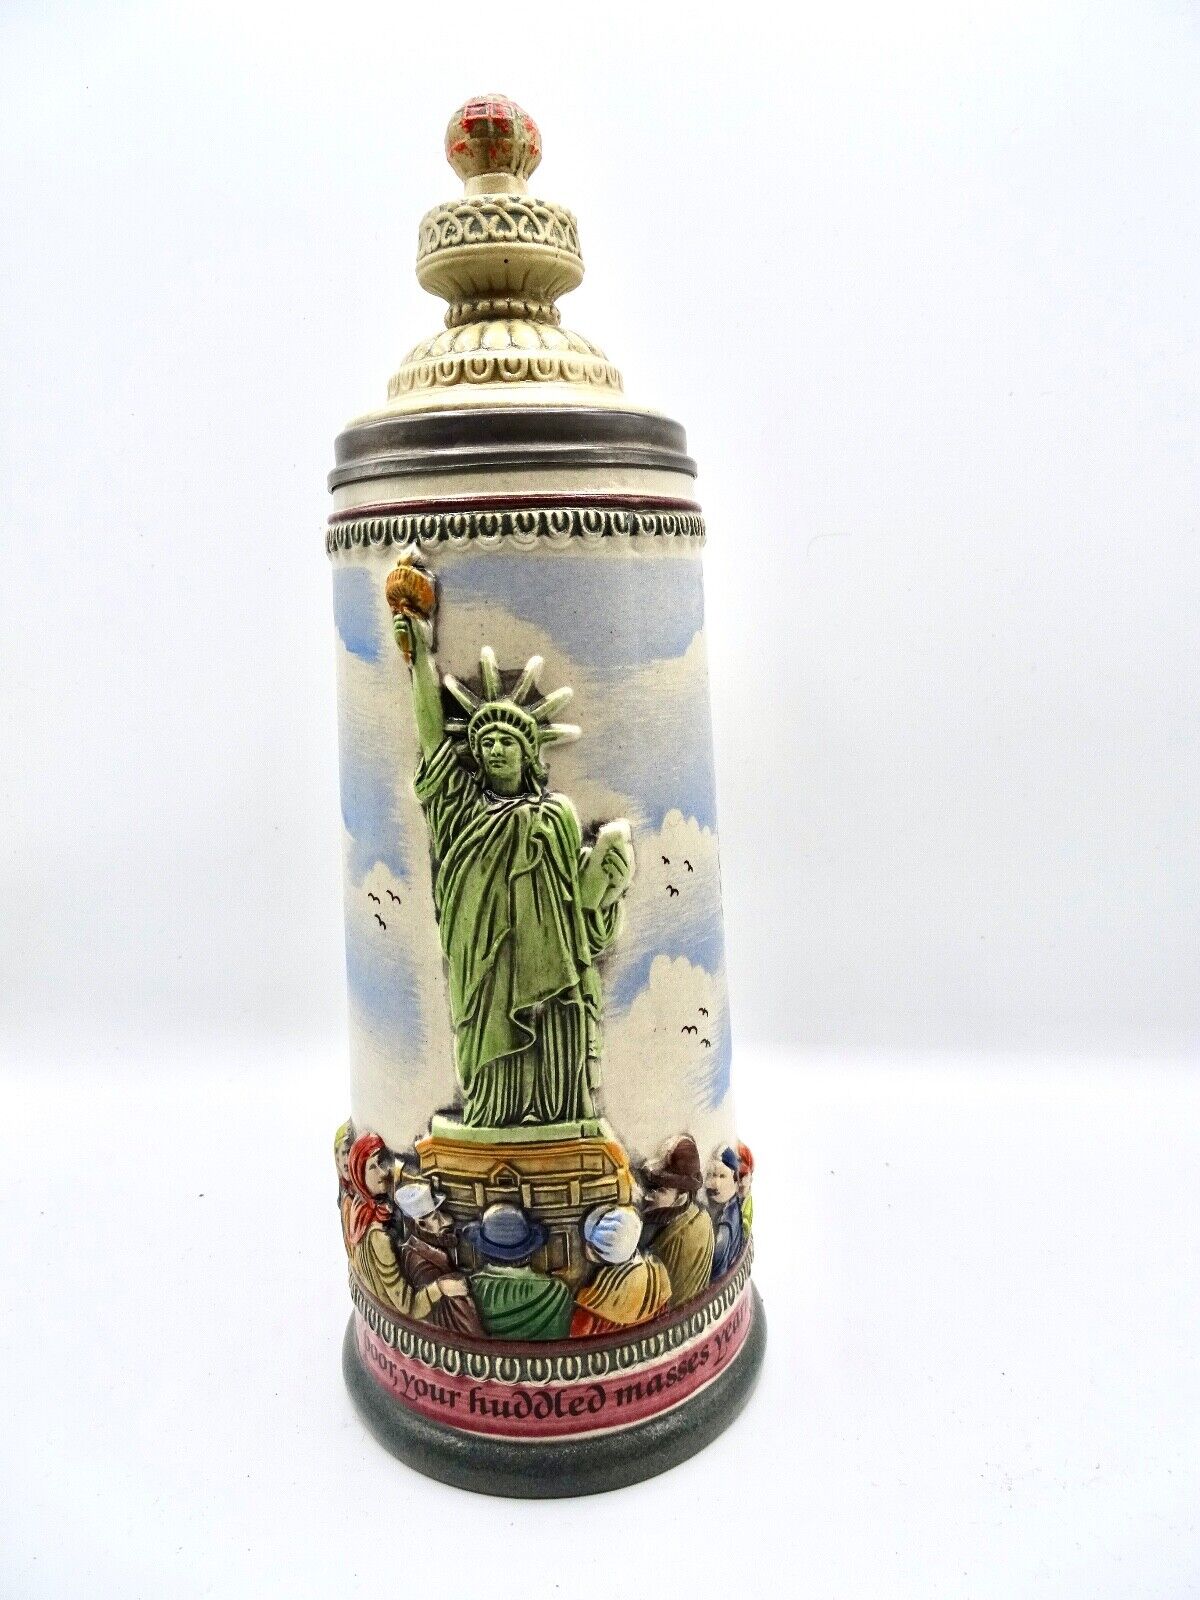 GERZ 1985 STATUE OF LIBERTY BEER STEIN 100th Anniversary #2847 Made in Germany